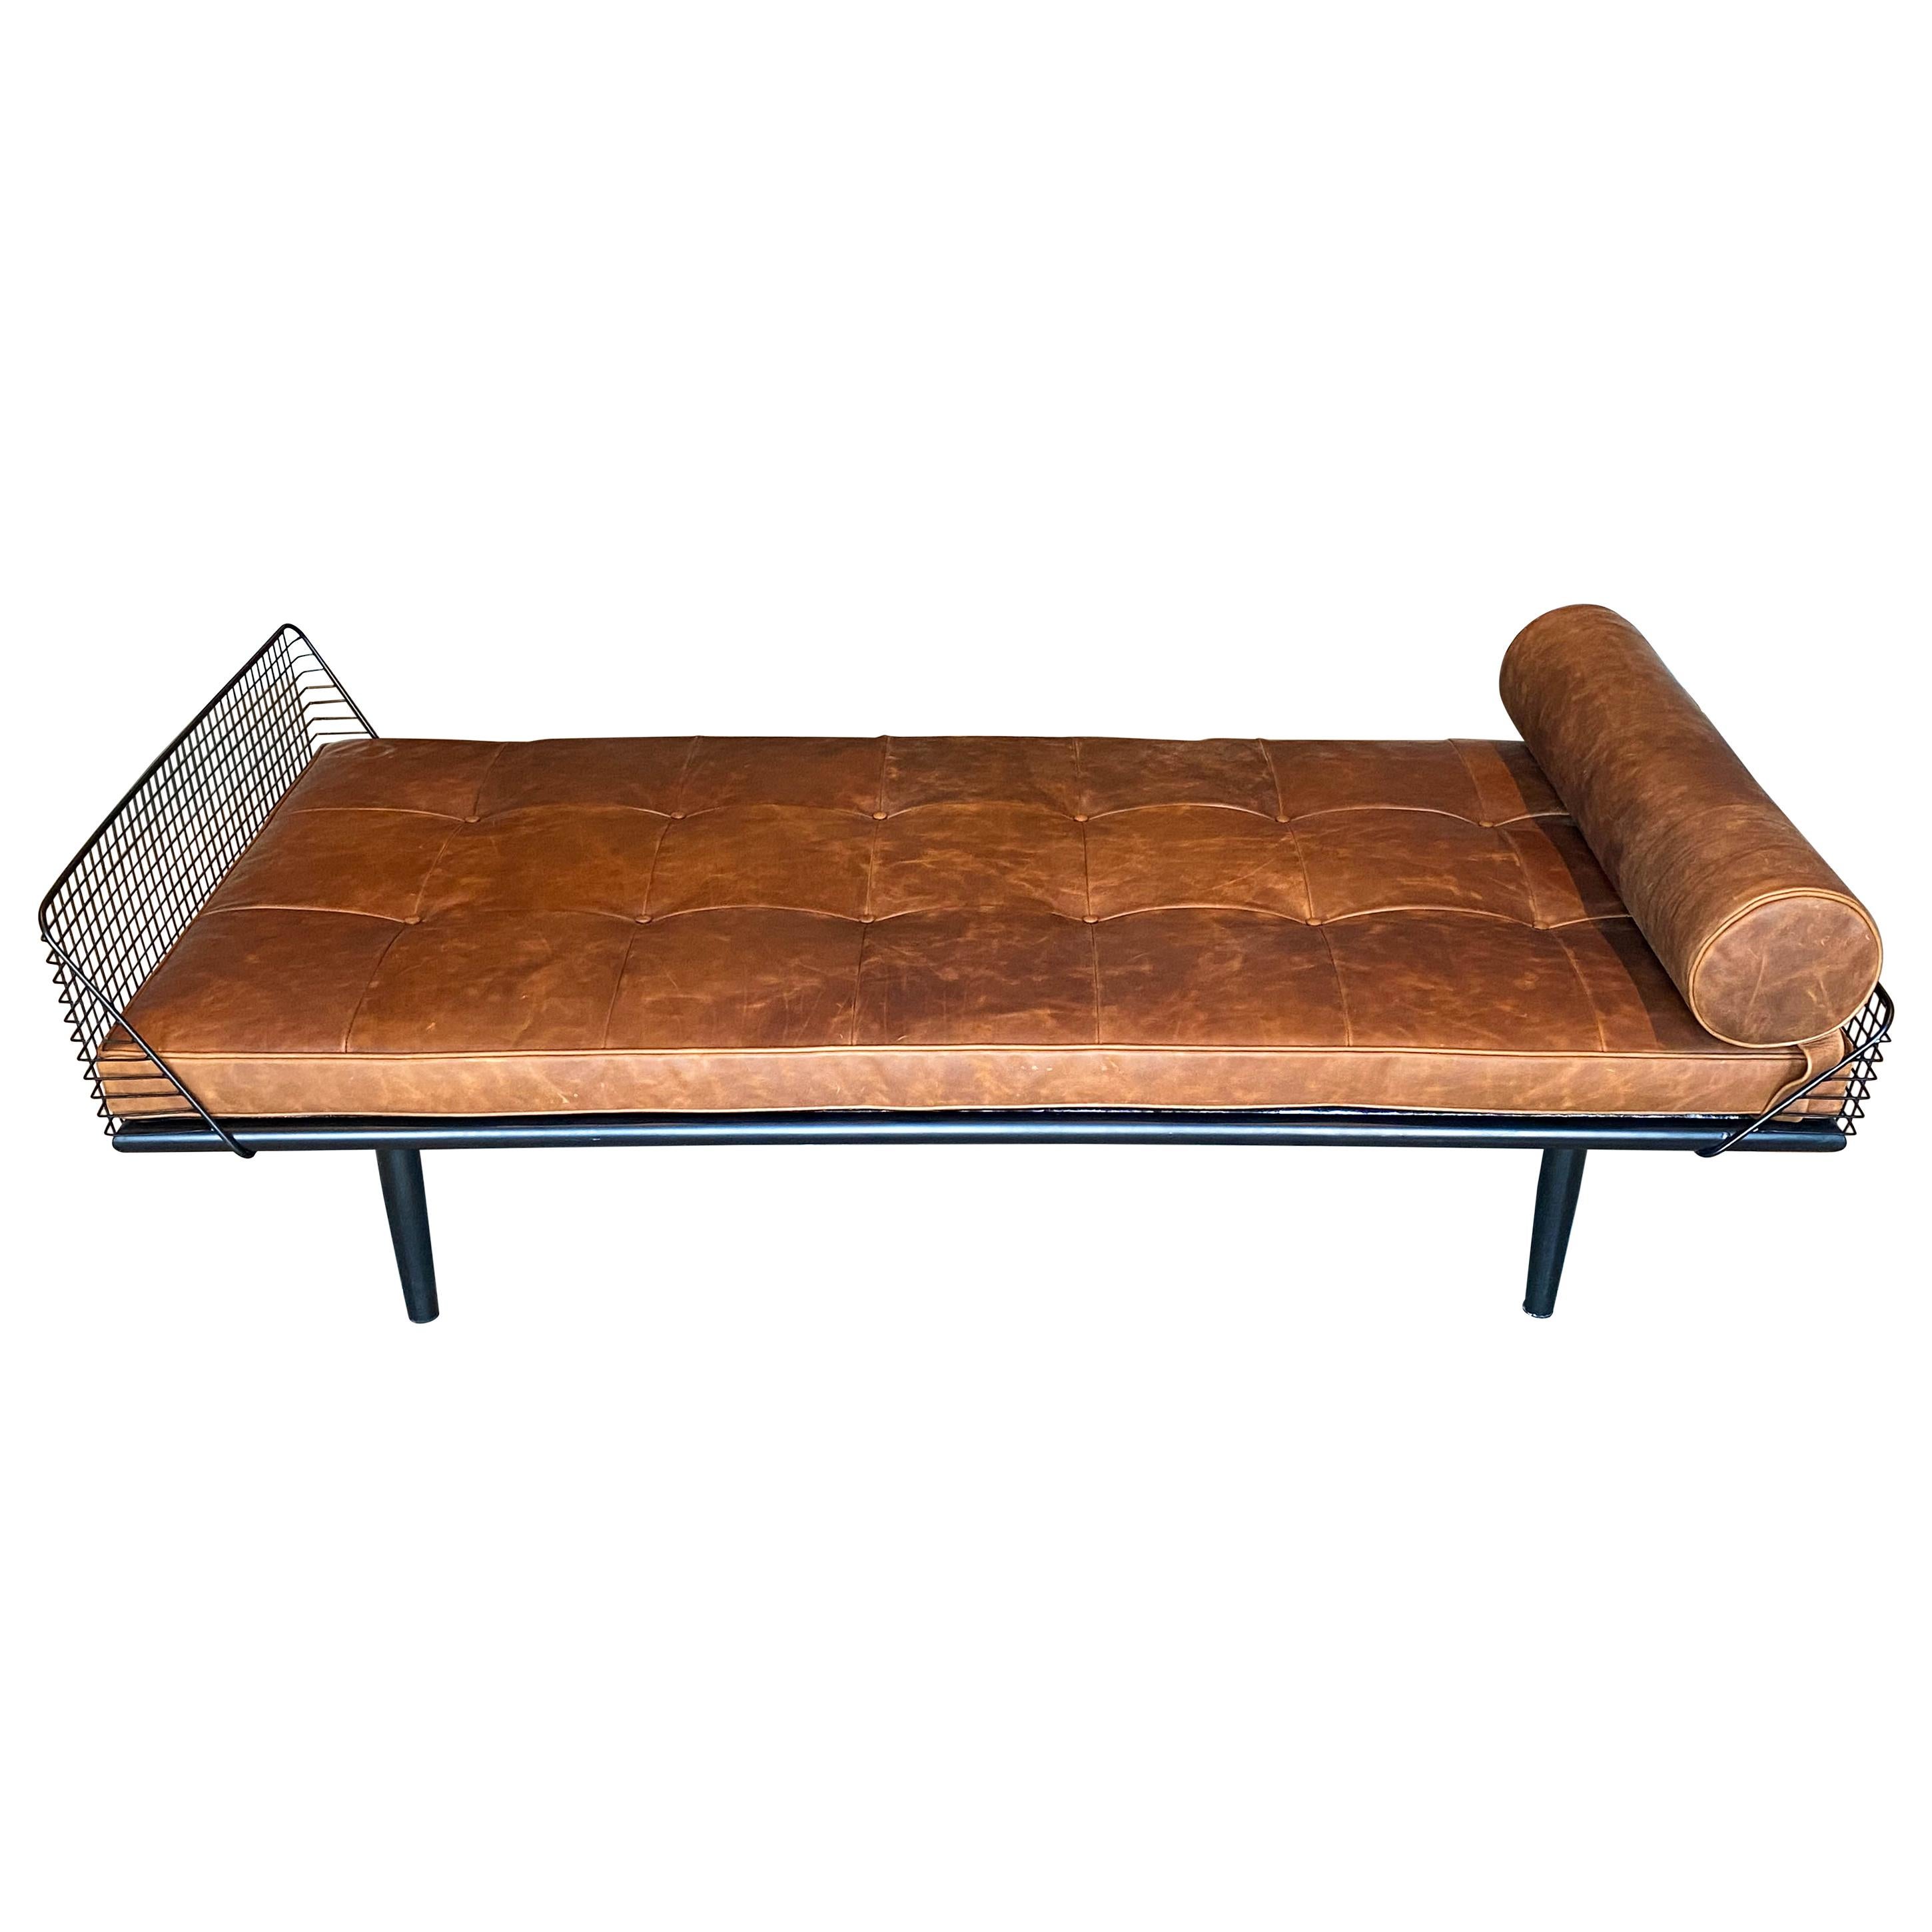 Studio Osklo Daybed 1 in Blackened Steel with Aged Leather Cushion and Bolster For Sale